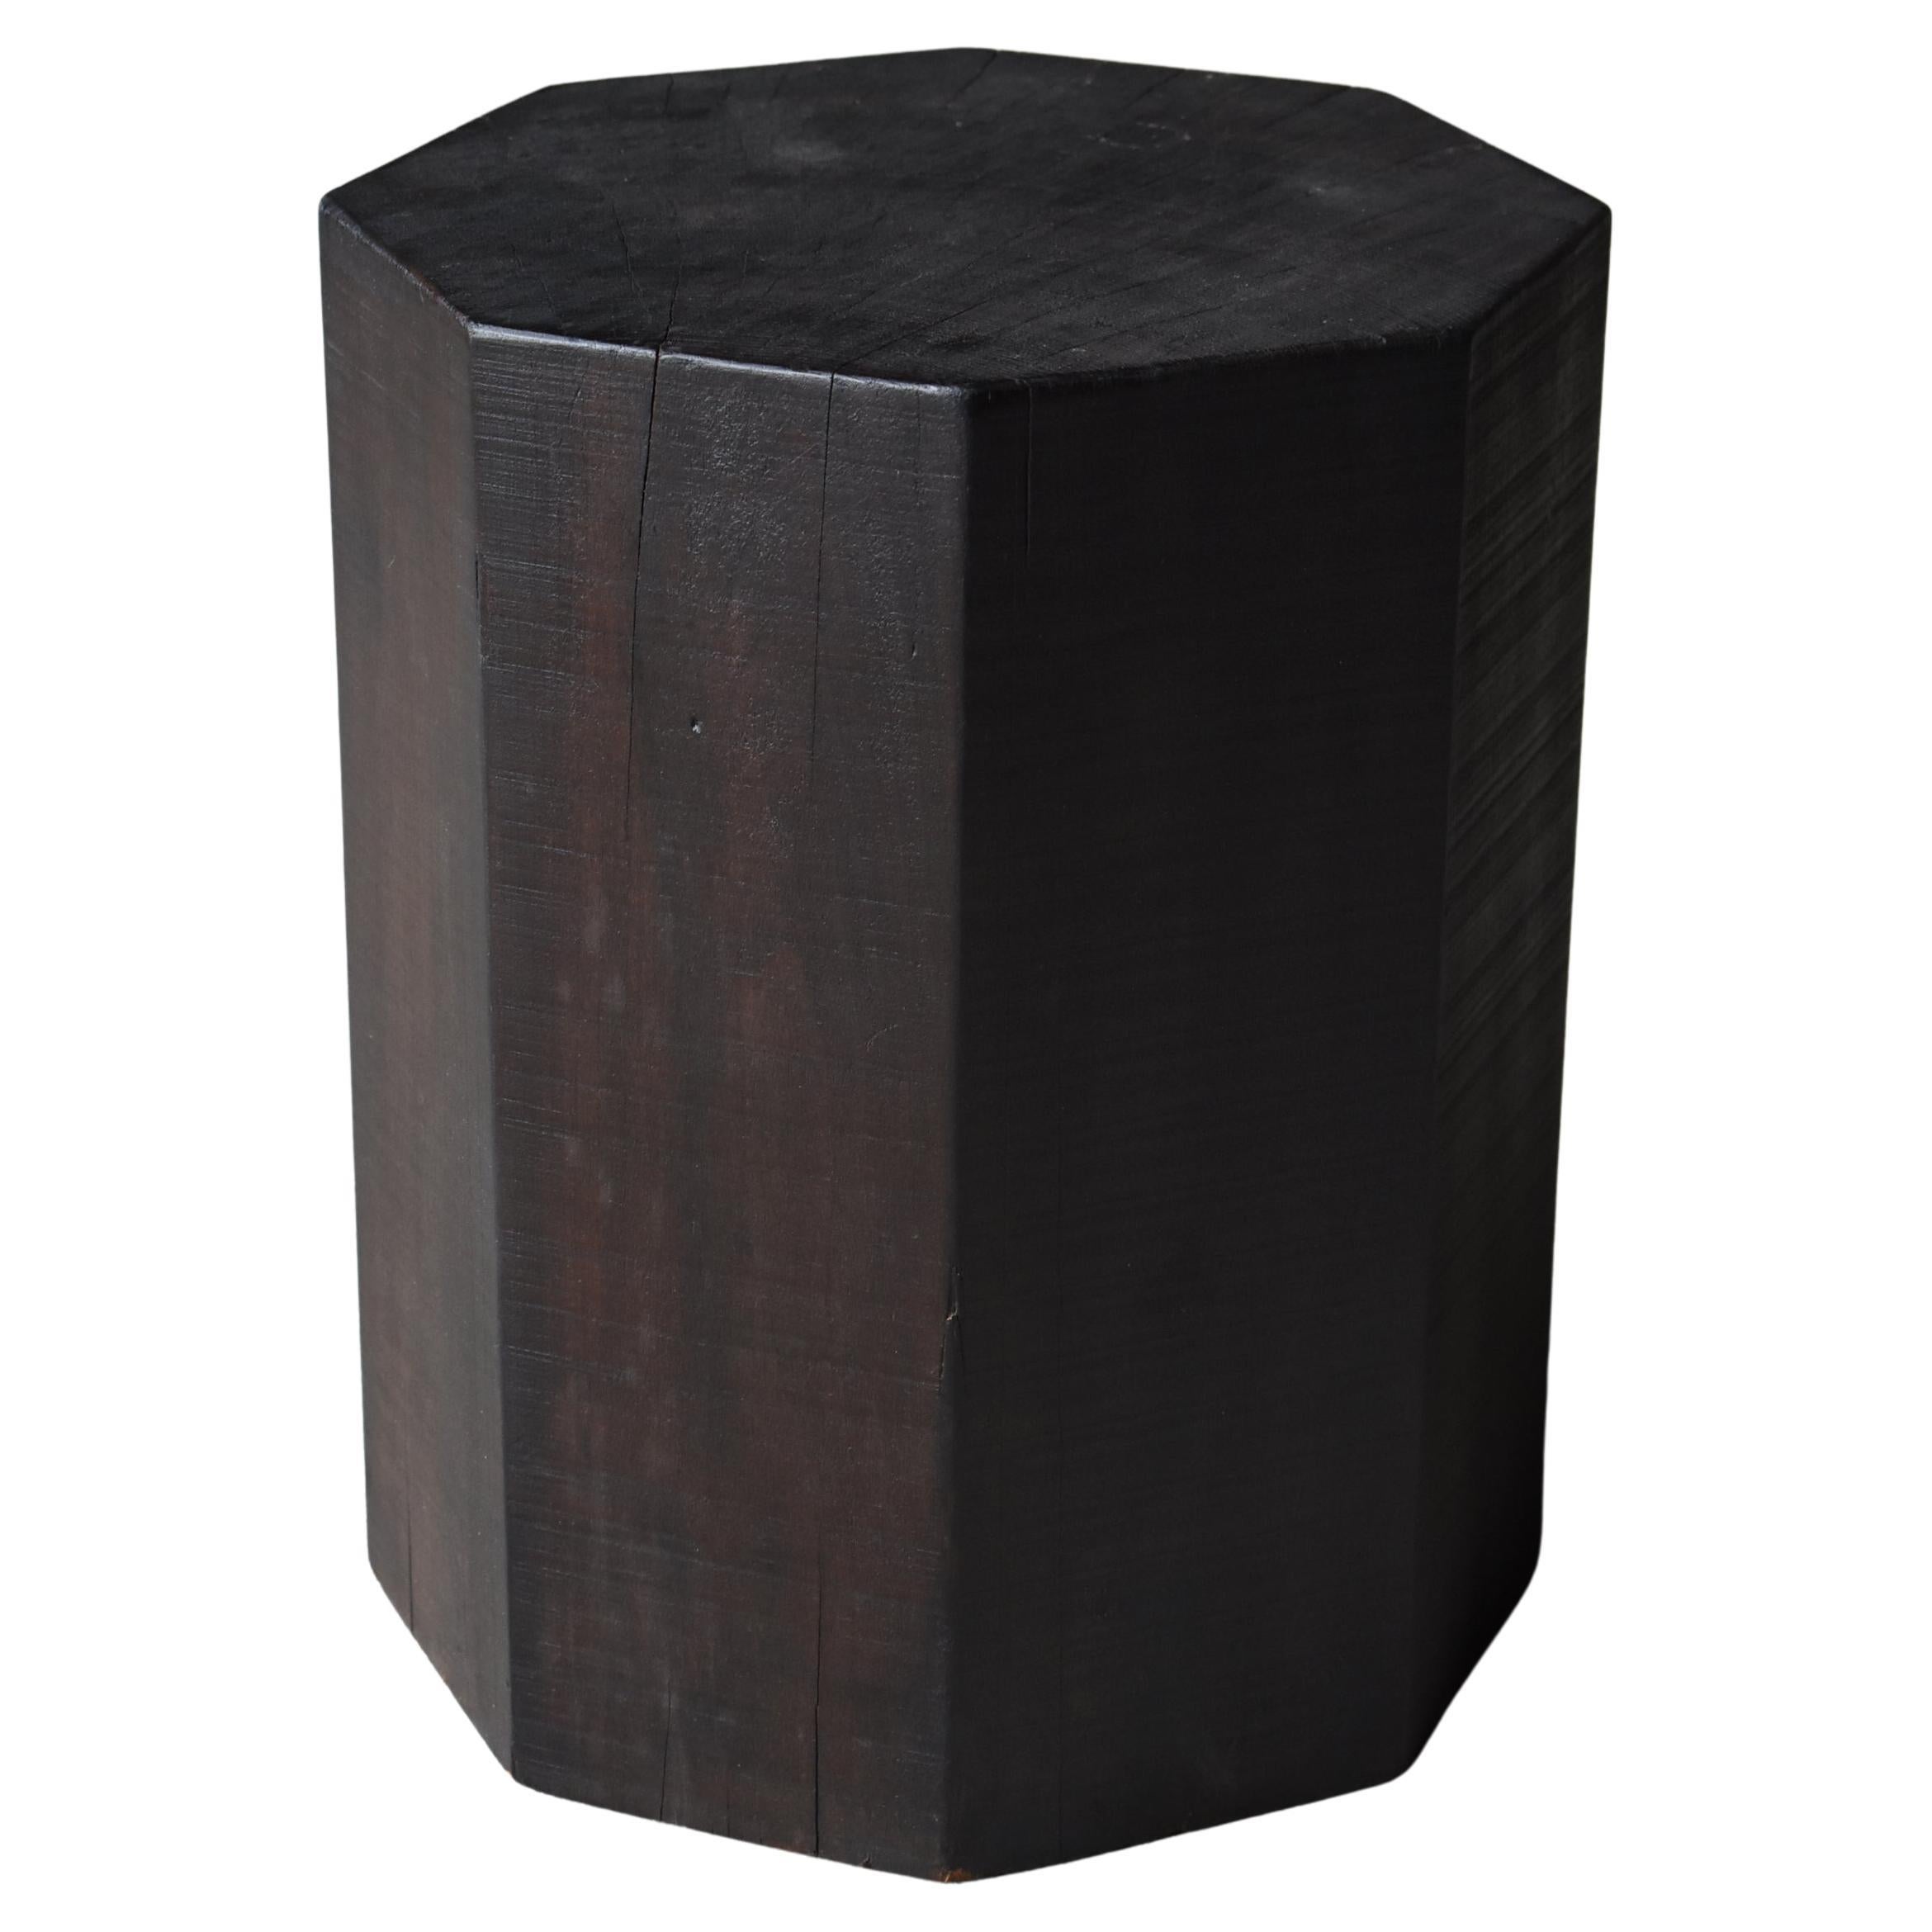 Japanese Old Octagon Wood Block 1940s-1960s / Side Table Stool Wabisabi For Sale